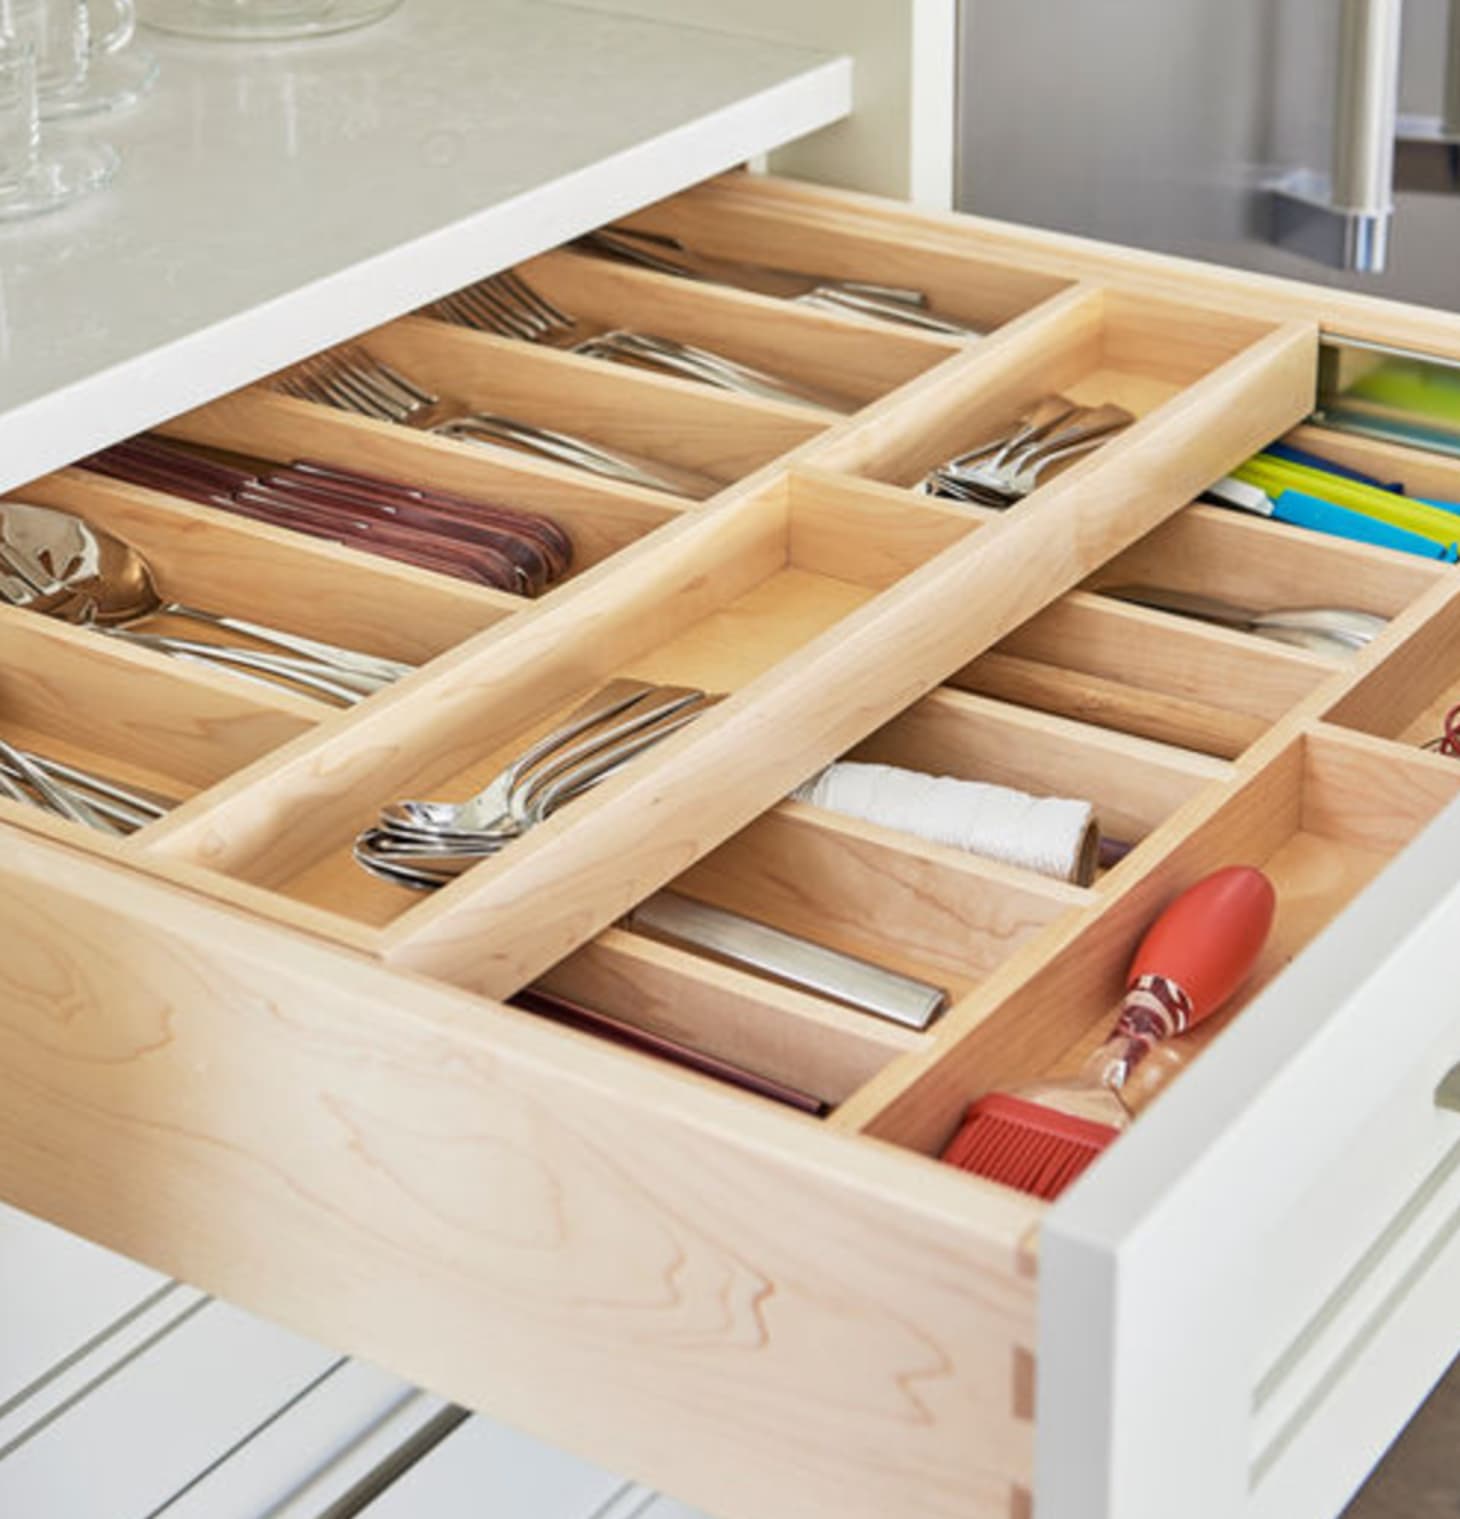 The 10 Most Organized Drawers on the Kitchn